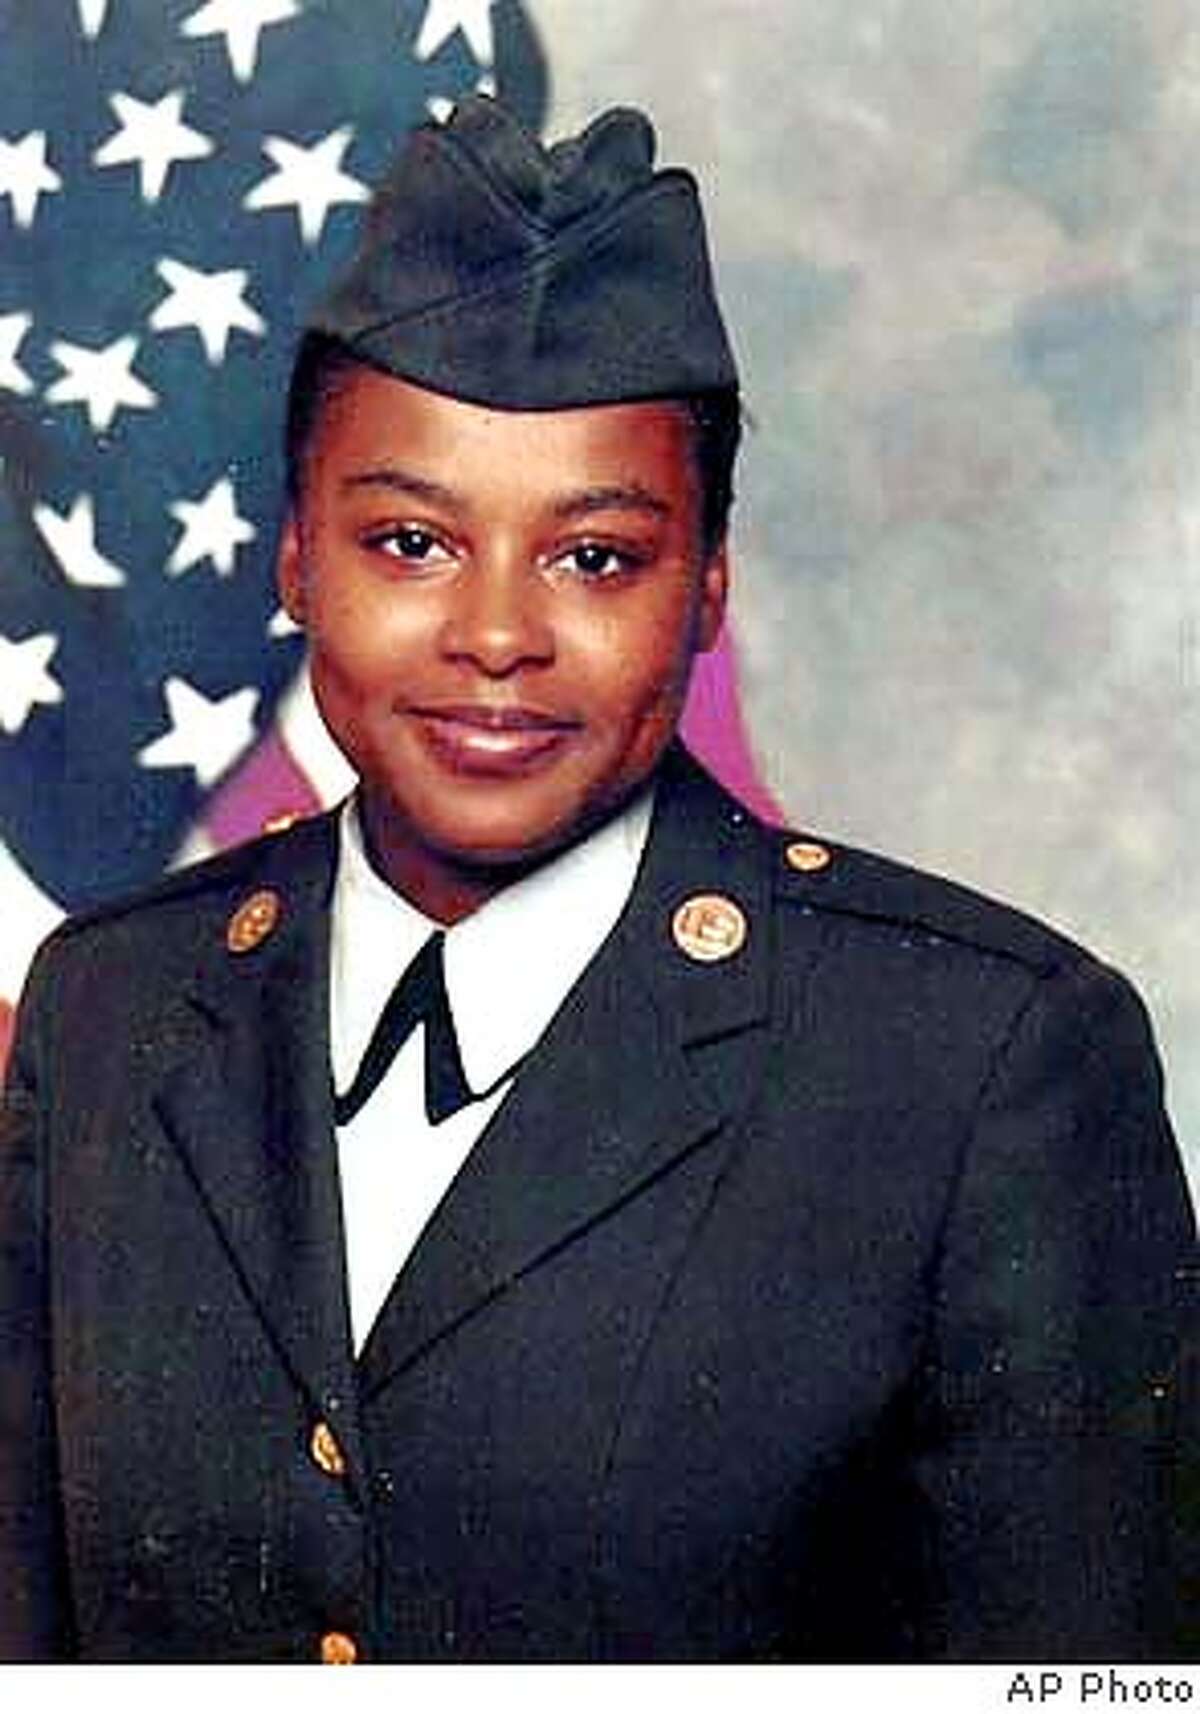 Army Sgt. Keicia M. Hines, shown in an undated, location unknown, photo released by the Department of Defense, died Wednesday, Jan. 14, 2004, when she was struck by a vehicle on an airfield in Mosul, Iraq. Hines, 27, of Citrus Heights, Calif., was assigned to the 108th Military Police, Combat Support Co., Fort Bragg, N.C. (AP Photo/Department of Defense via The Sacramento Bee)